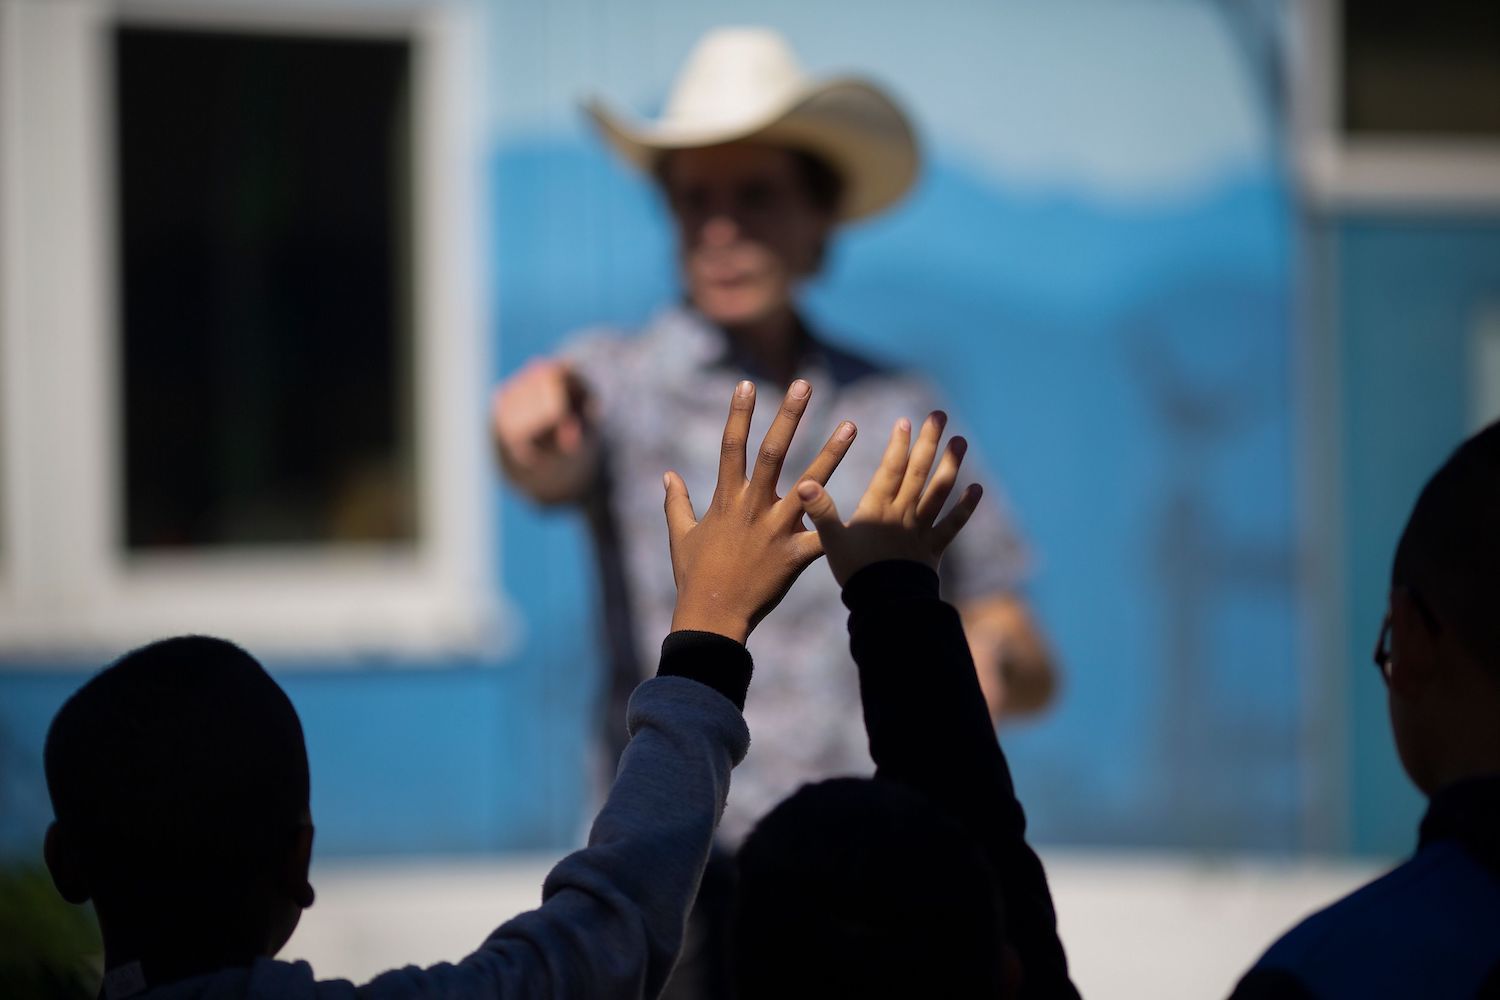 Kimbal Musk blurred in the distance points towards students of color at Eucalyptus Elementary School raising their hands in the foreground. March 13, 2019.